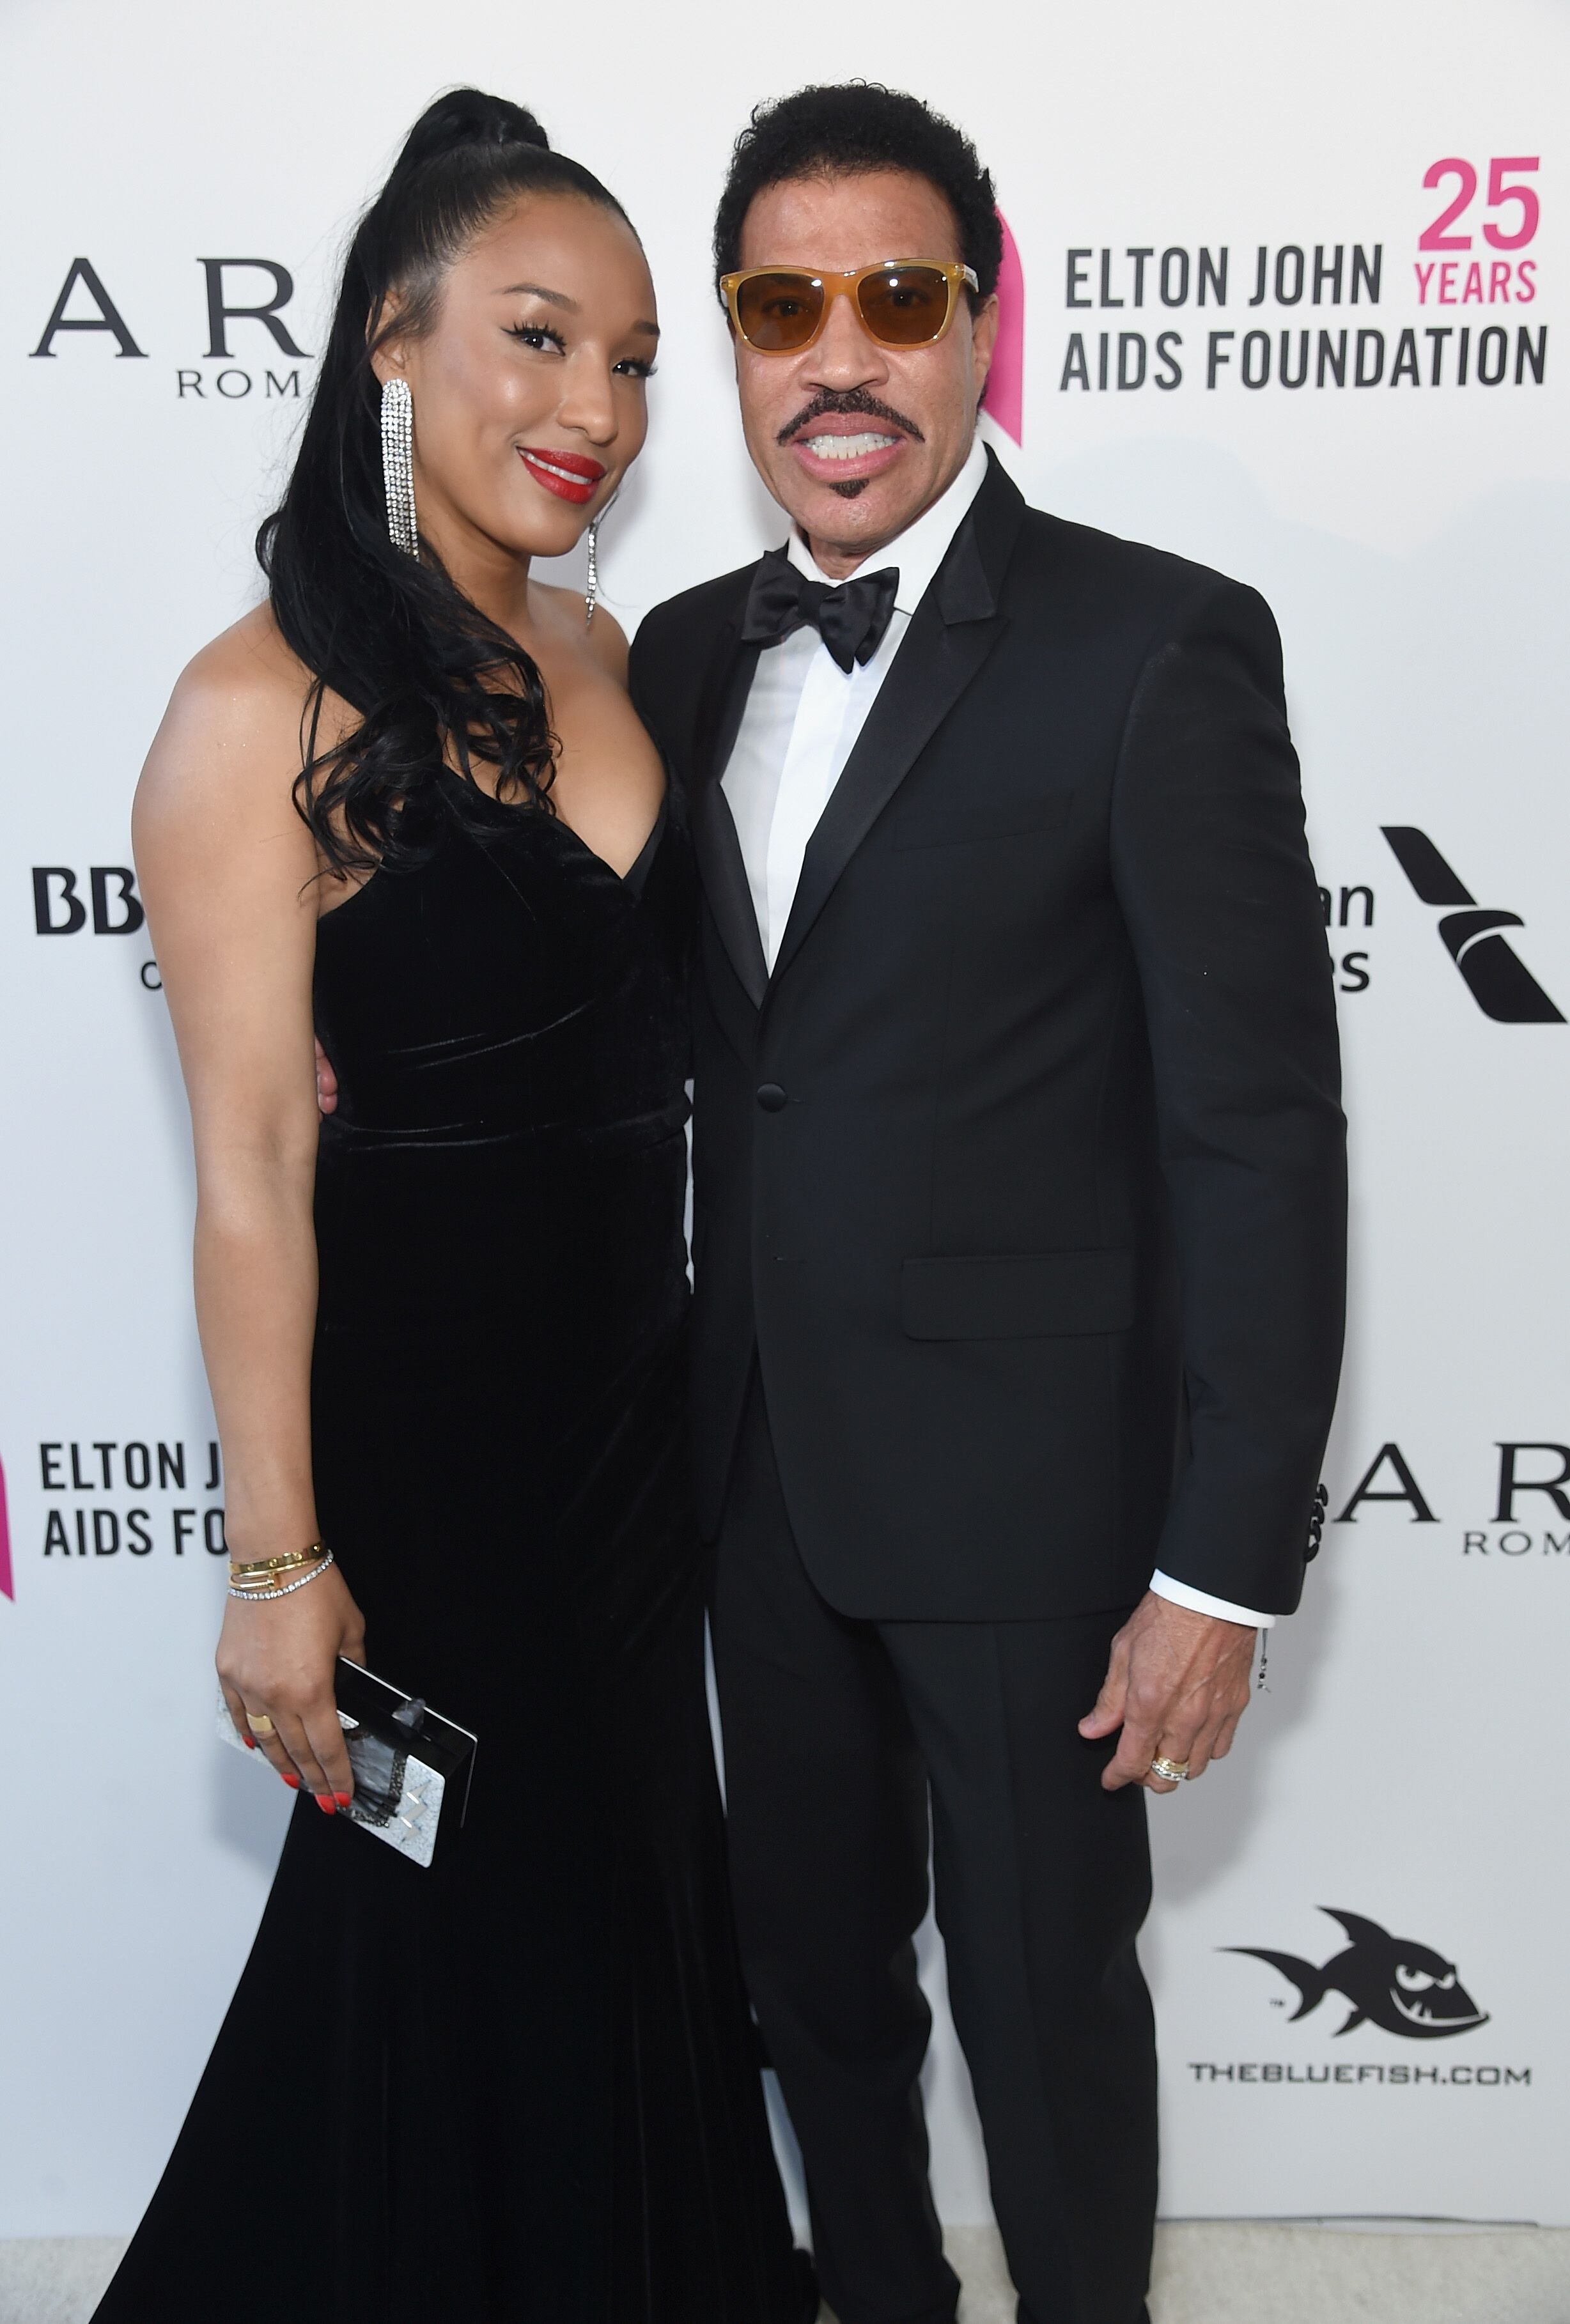 Lionel Richie and Lisa Parigi at the 25 Year Gala of the Elton John AIDS Foundation/ Source: Getty Images